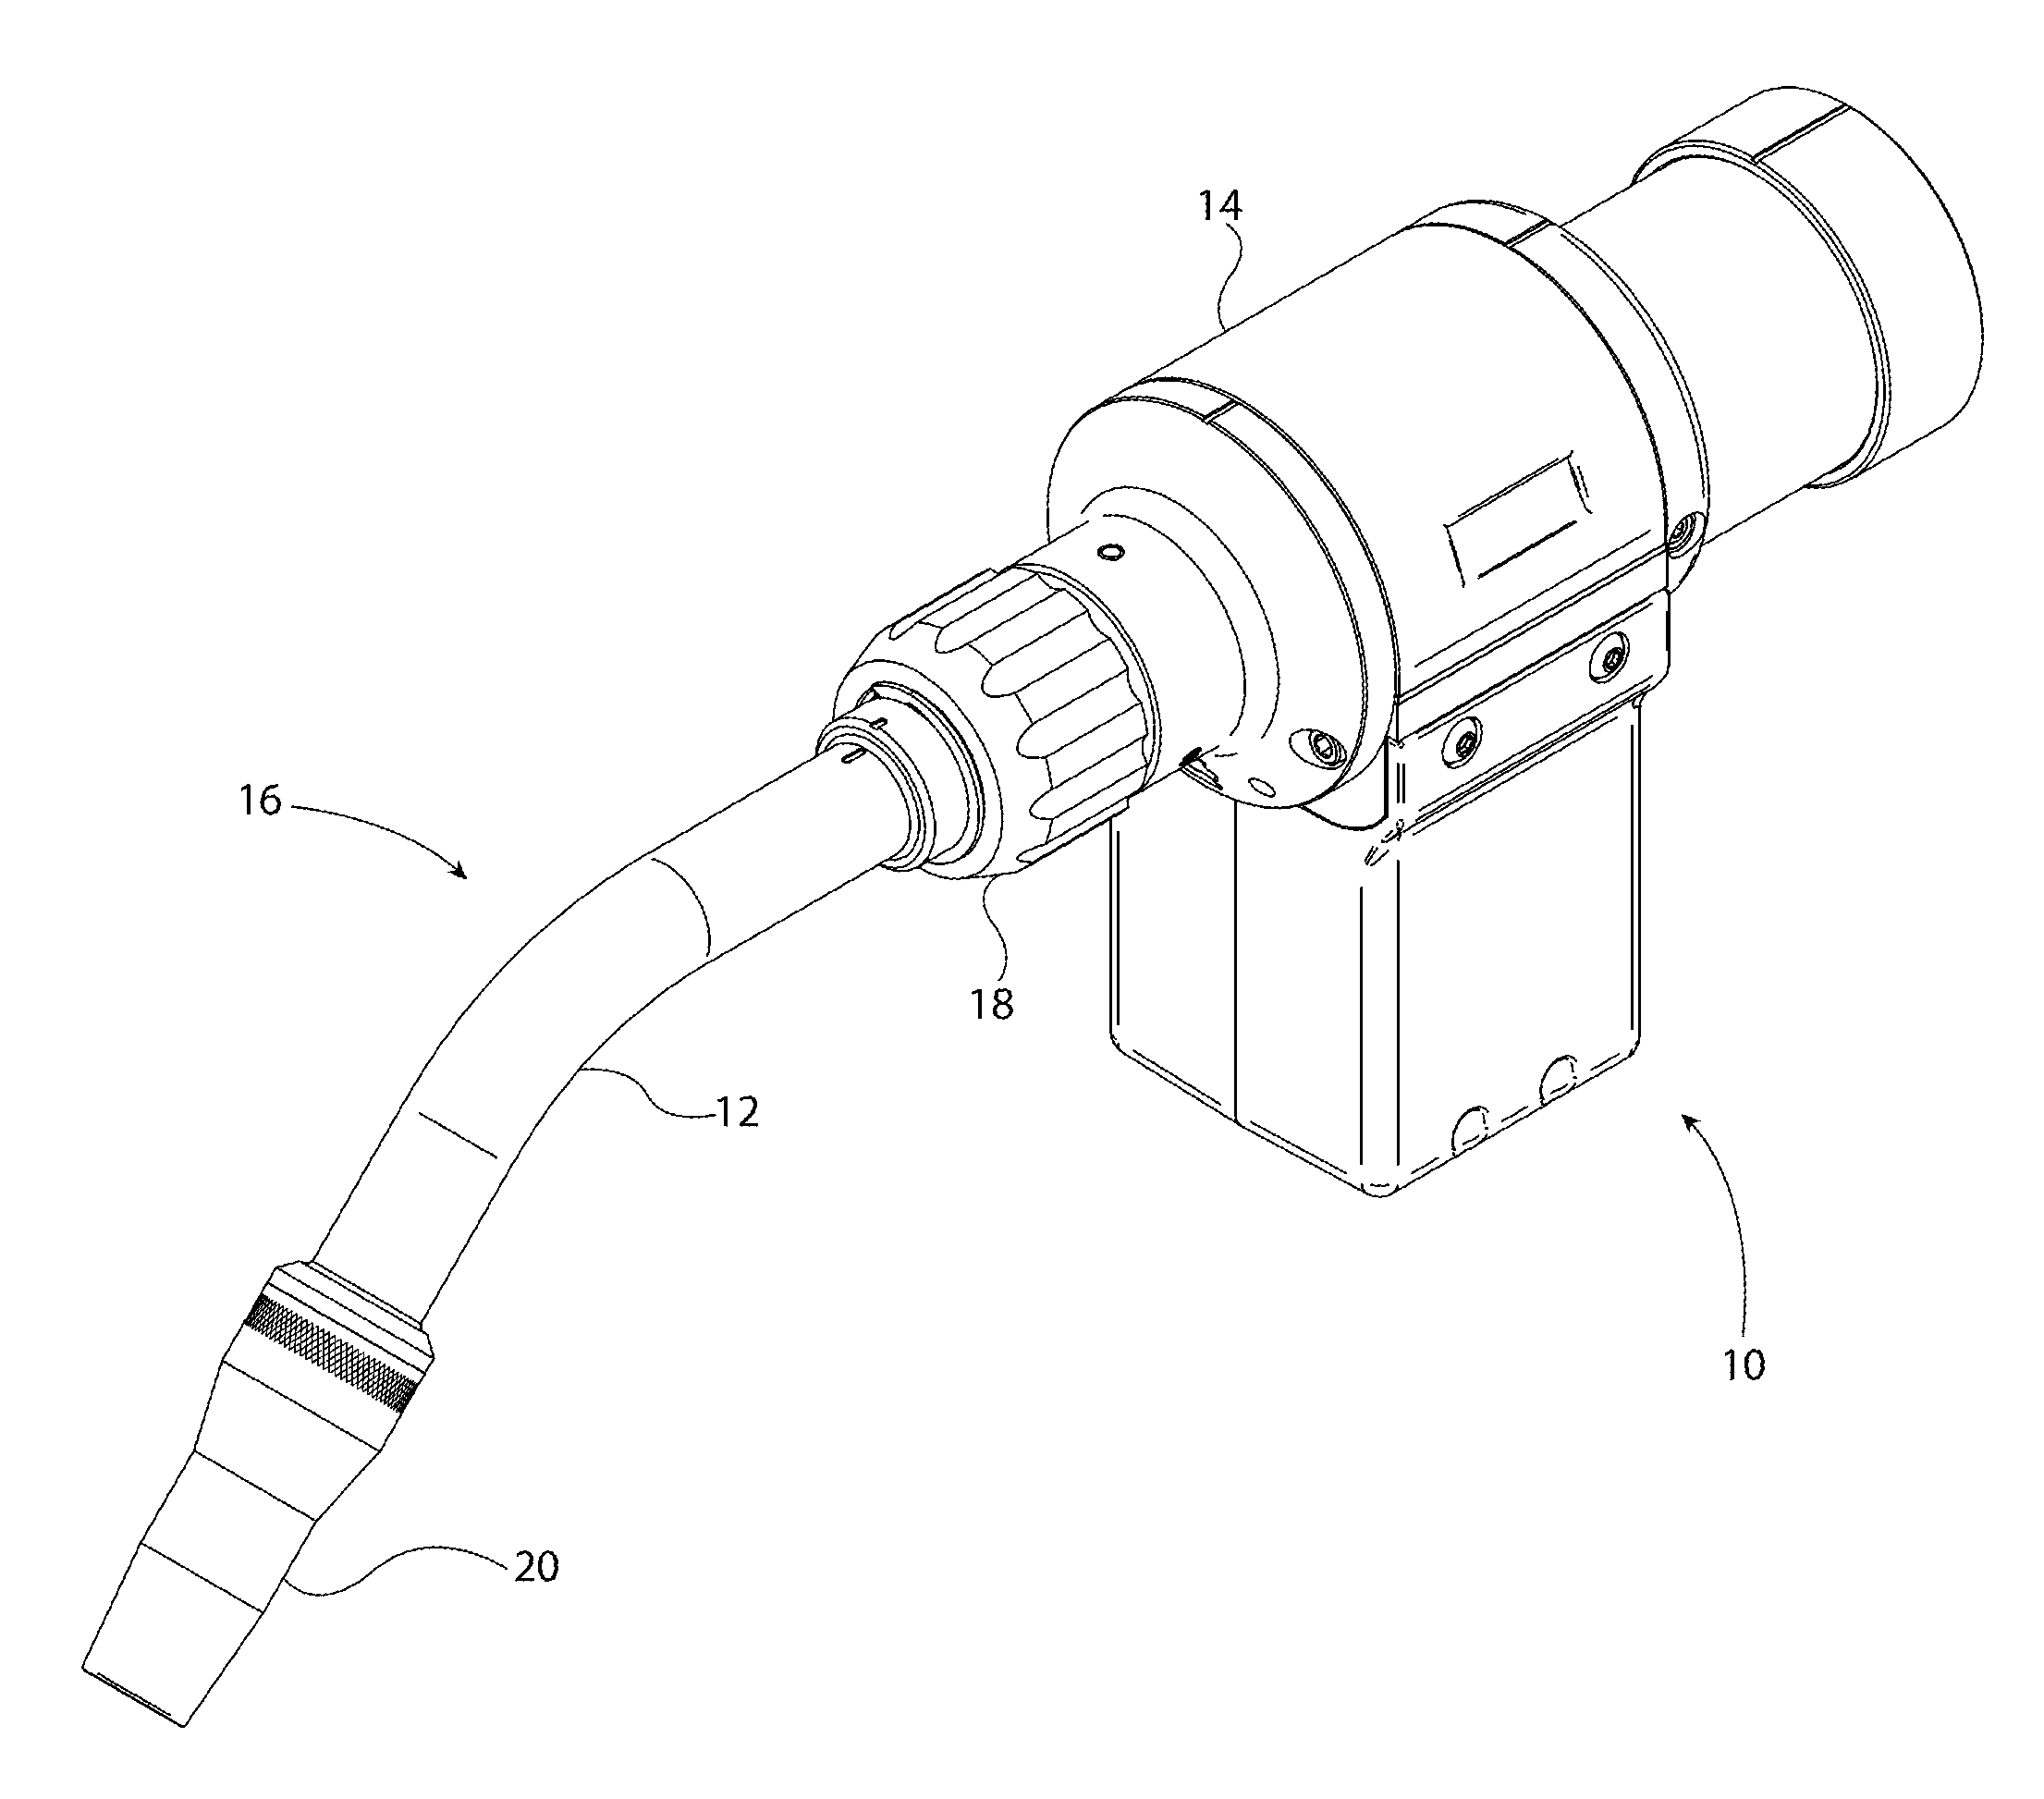 Electric arc torch with cooling conduit